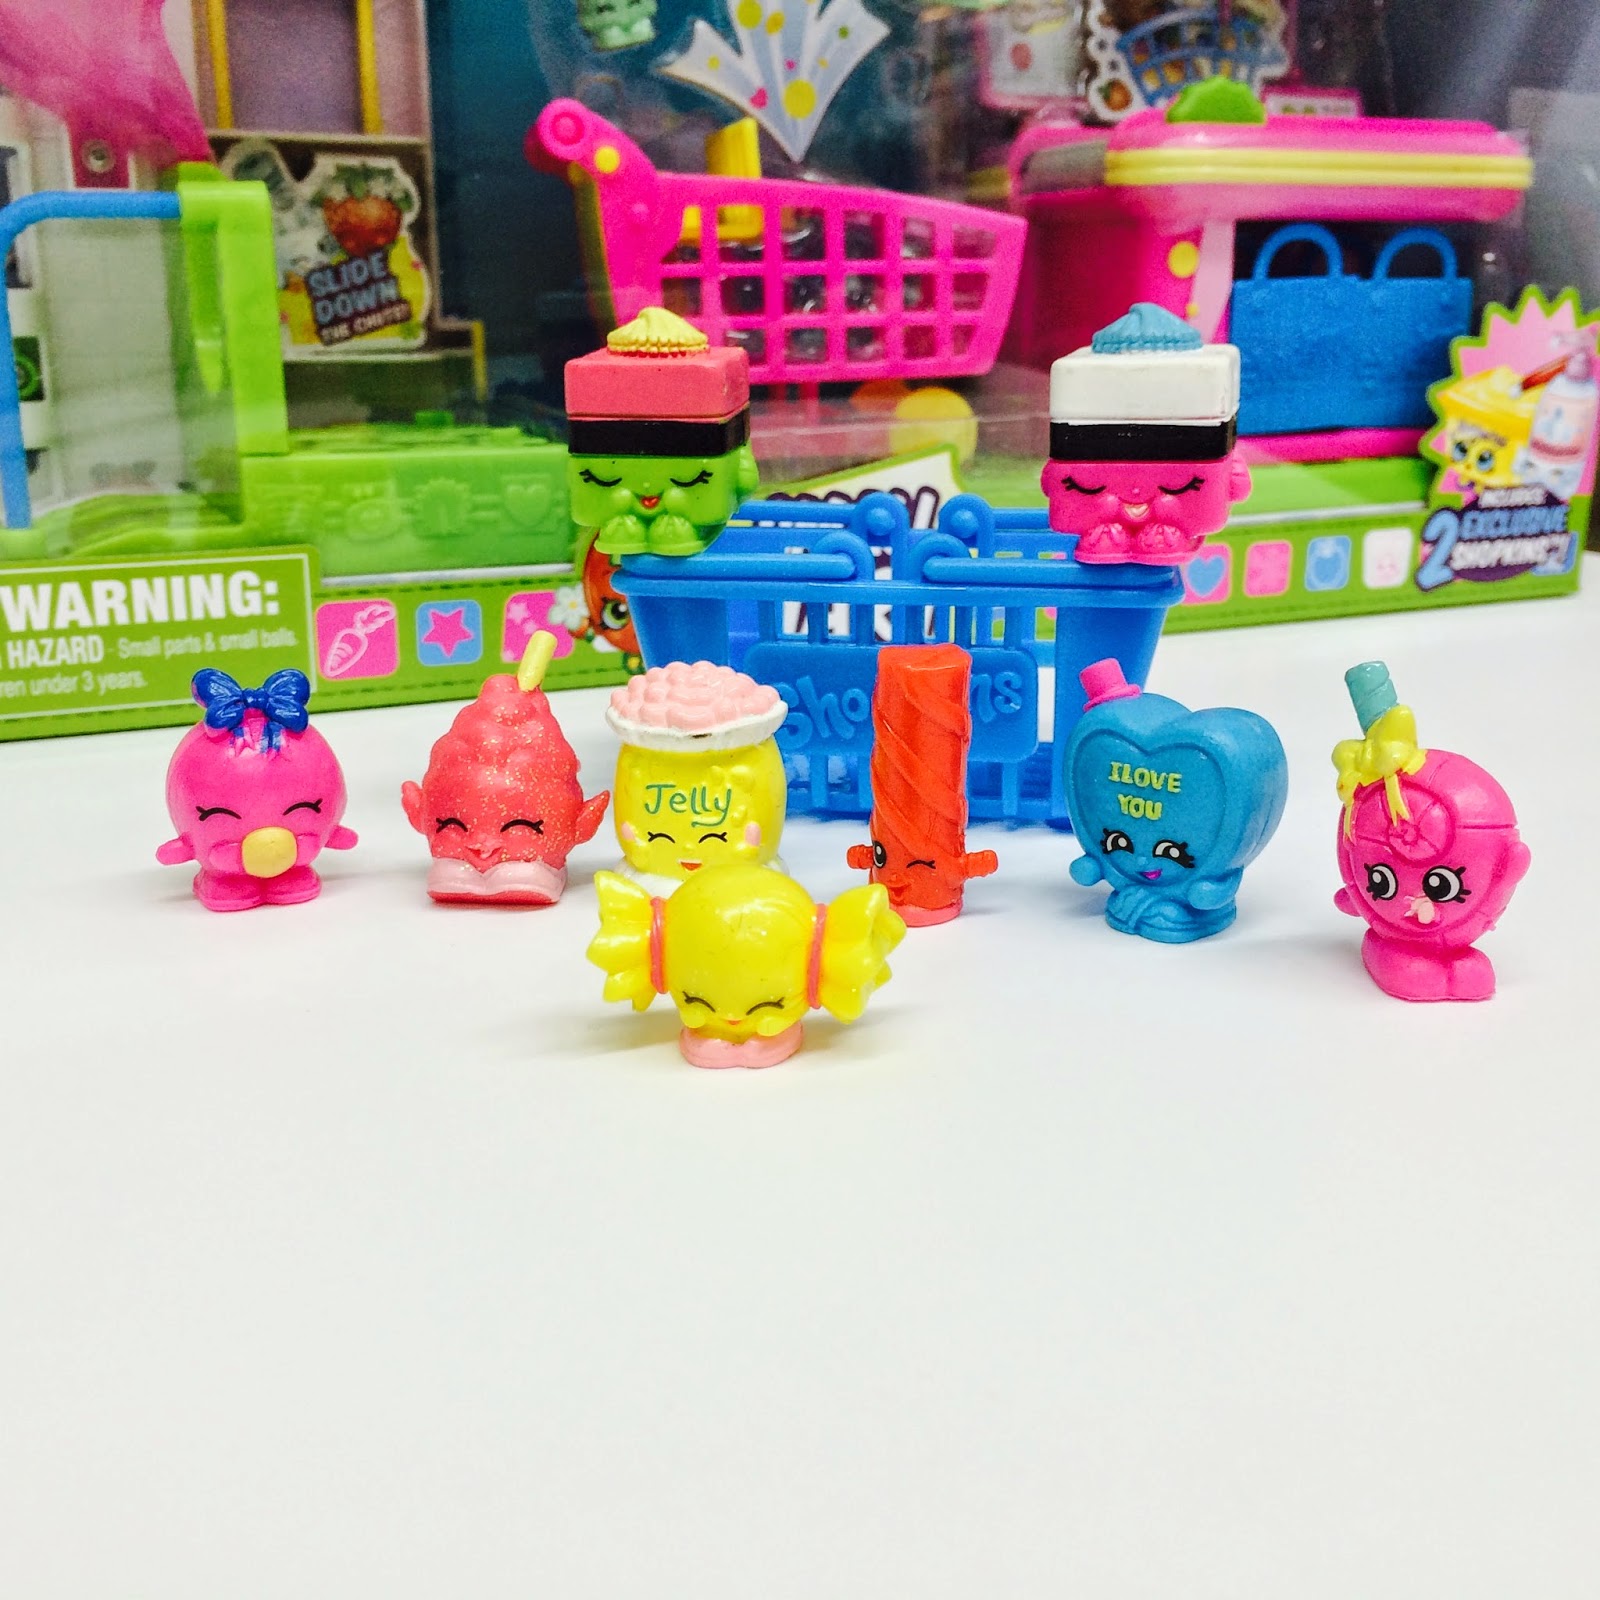 Matilda's Toy Shop: Our Shopkins Collection up to date